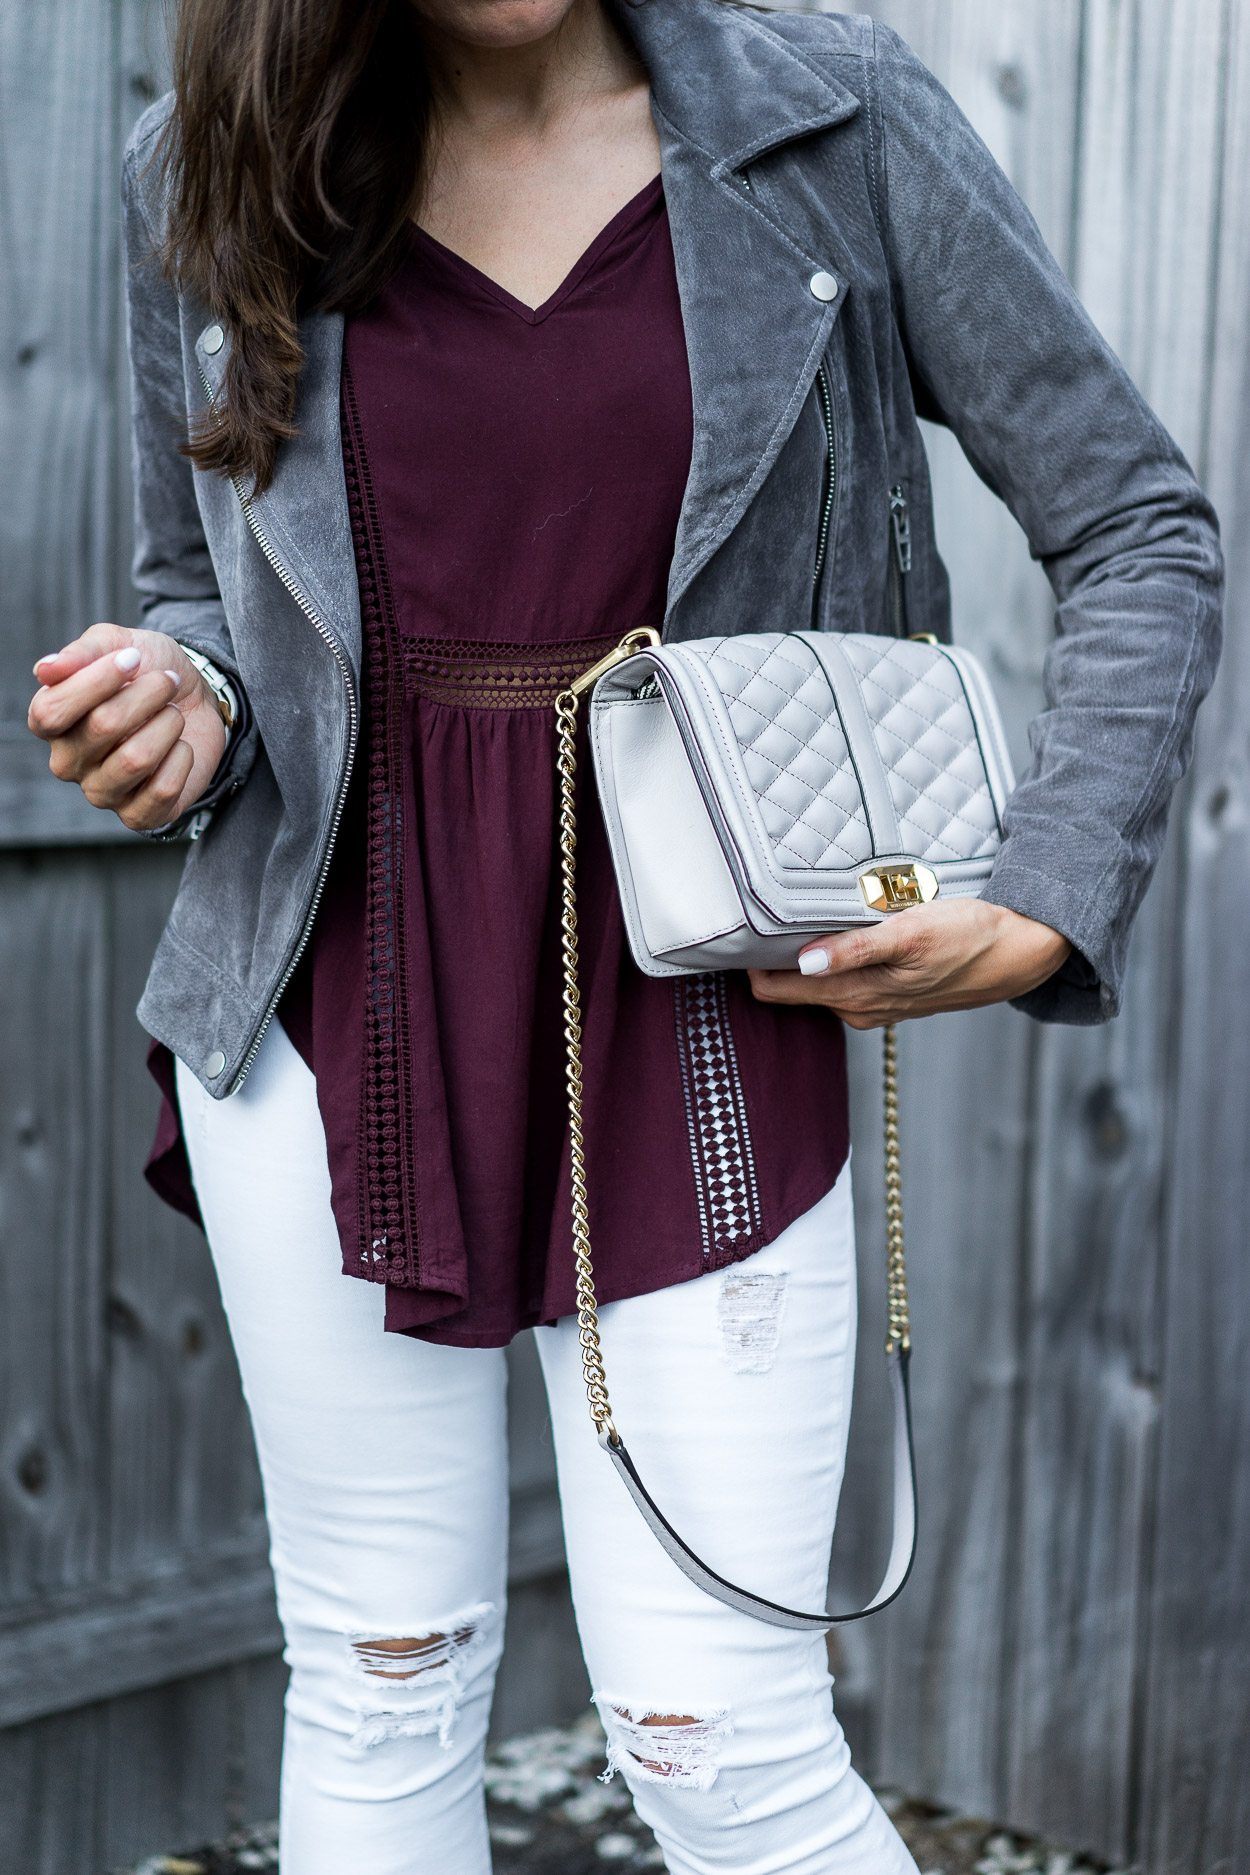 Gentle Fawn top and white AG jeans make the perfect casual Fall outfit as styled by A Glam Lifestyle blogger Amanda